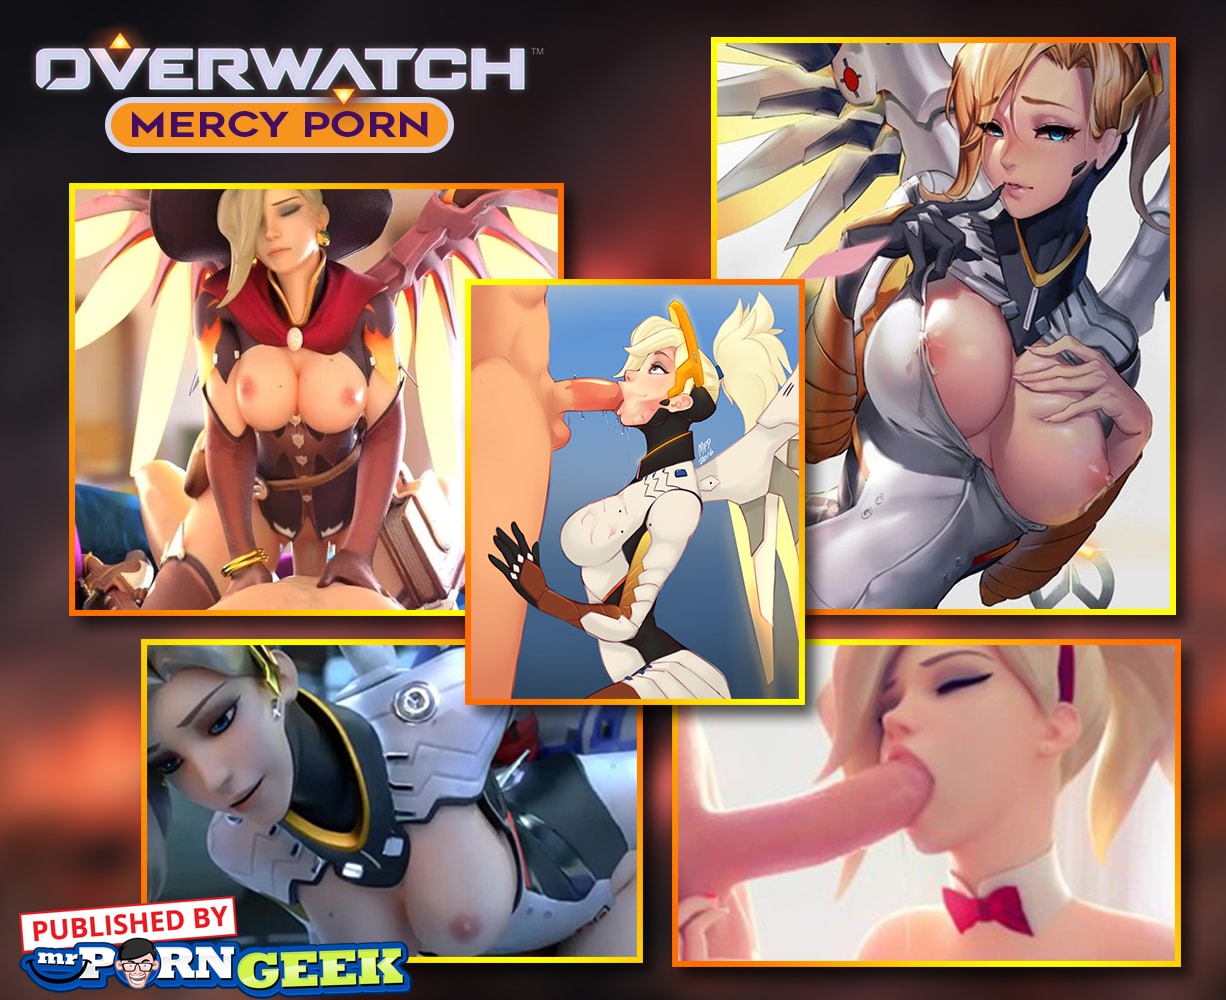 Overwatch Game Porn - Top Video Game Overwatch Characters And Great Porn At Mr. Porn Geek